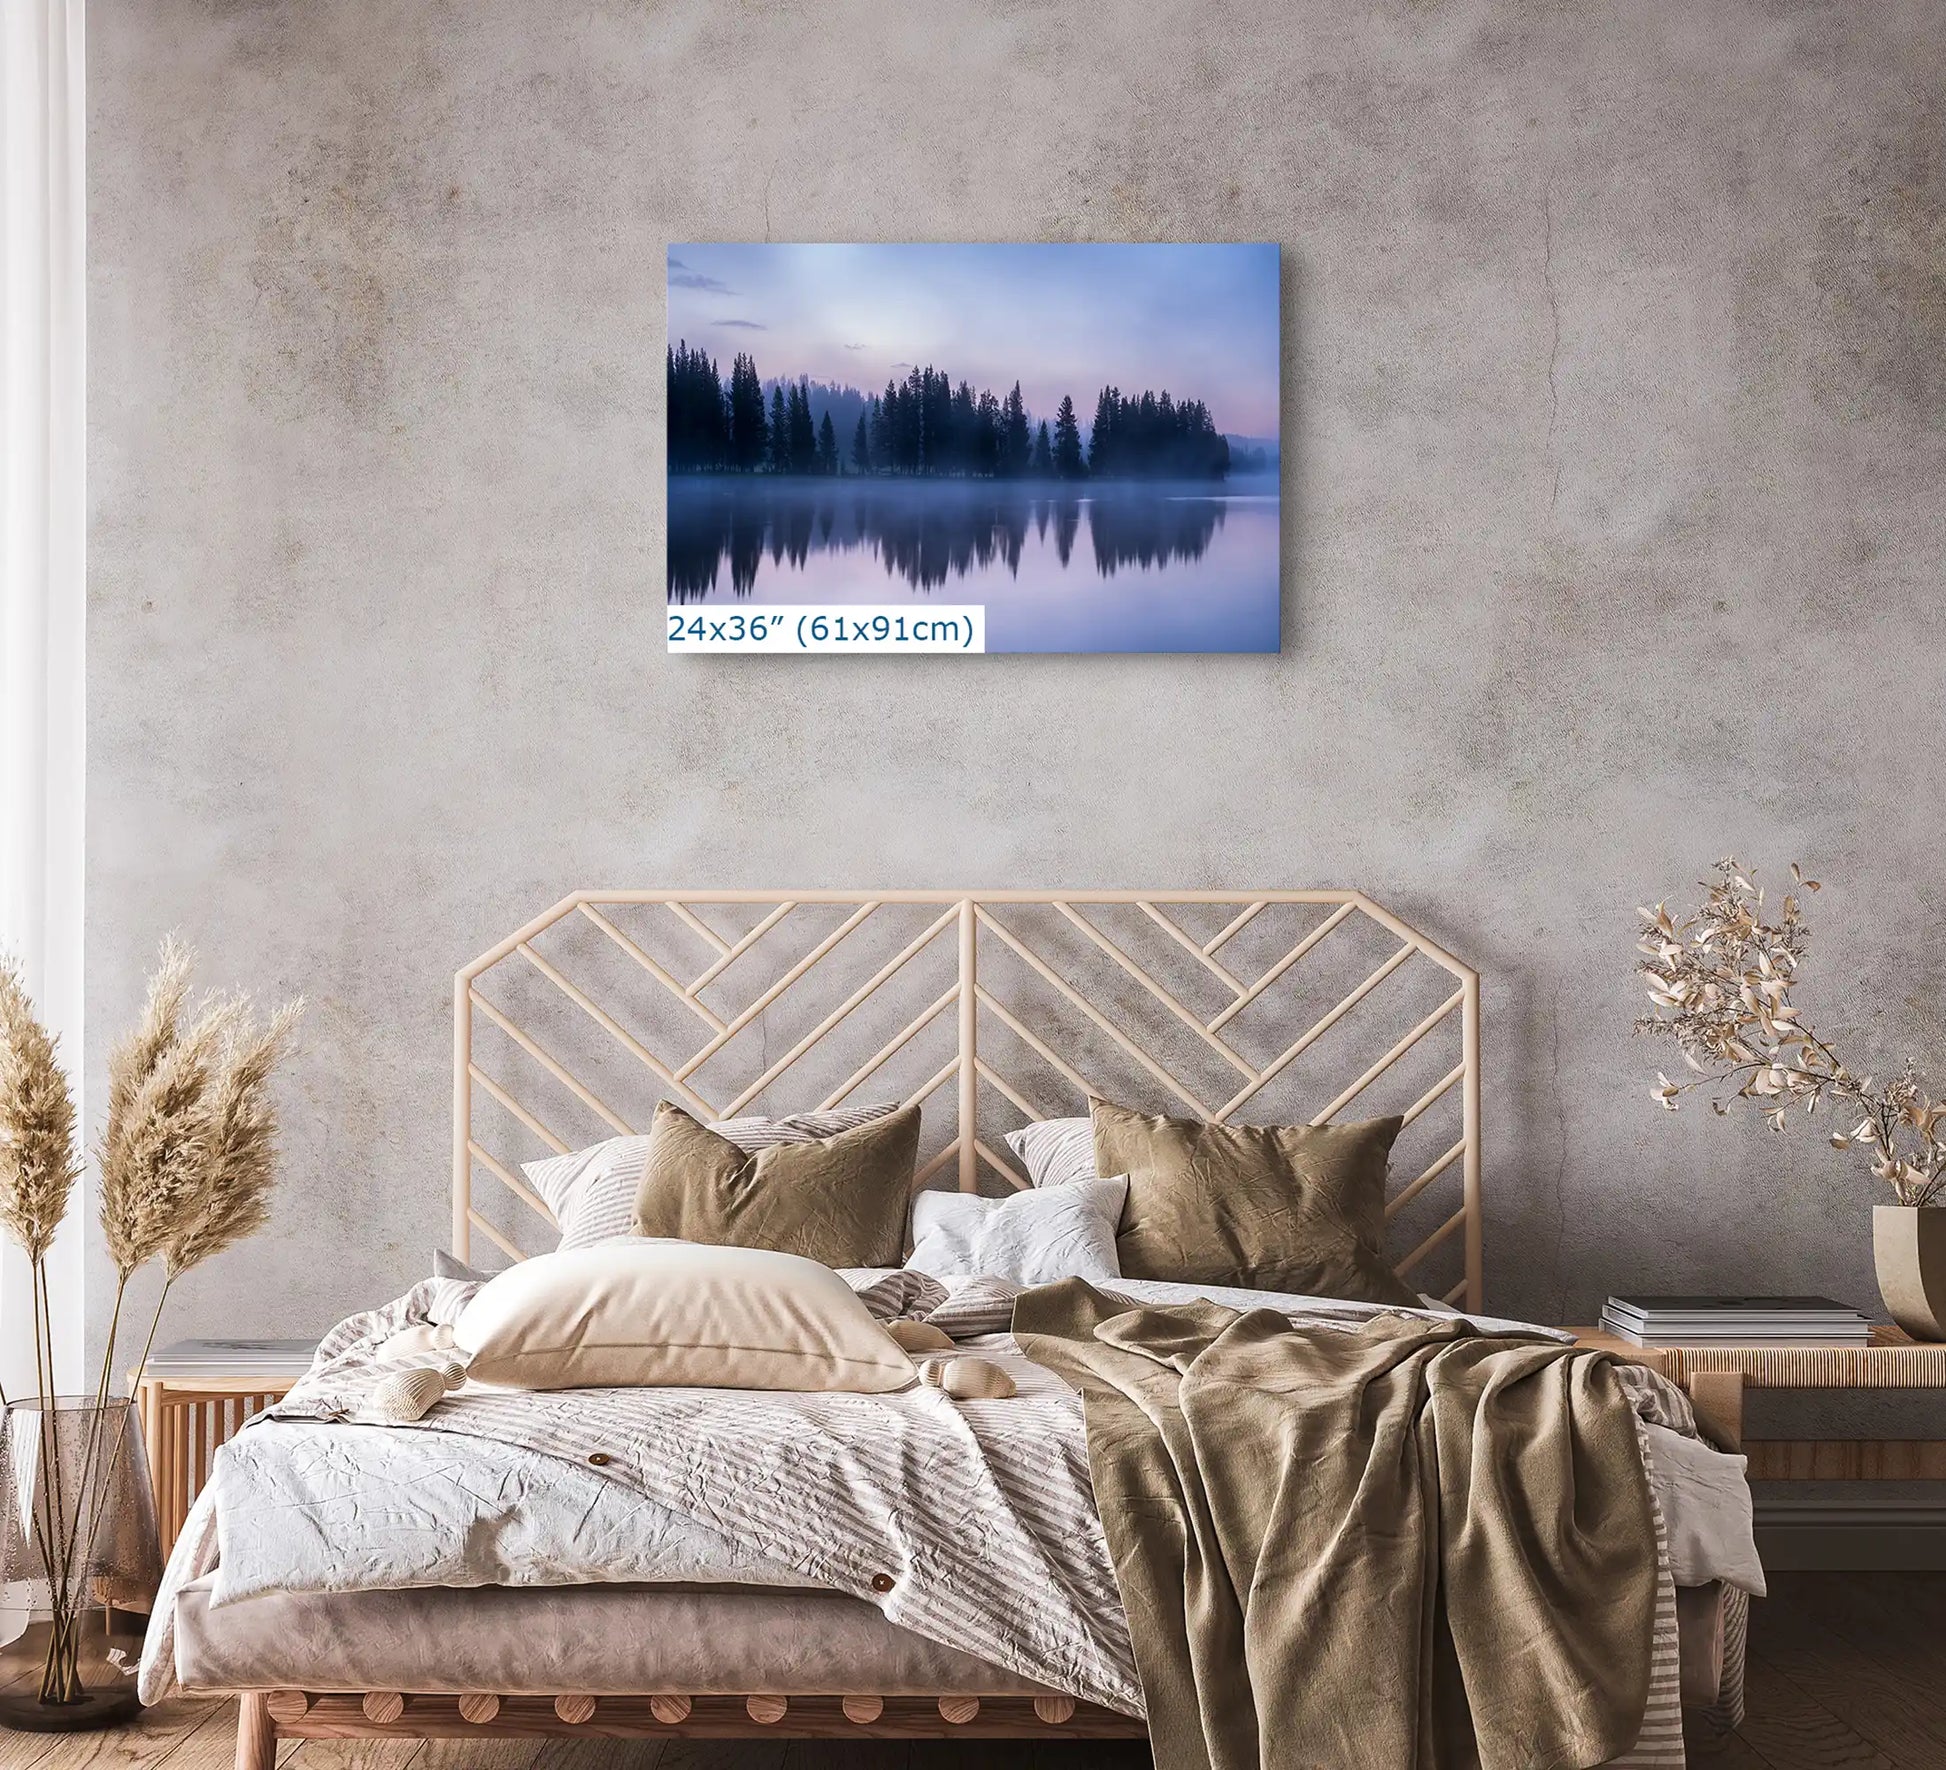 A 24x36 wall art print of Yellowstone Lake reflection at twilight above a bed, creating a peaceful bedroom retreat with its calming reflection.